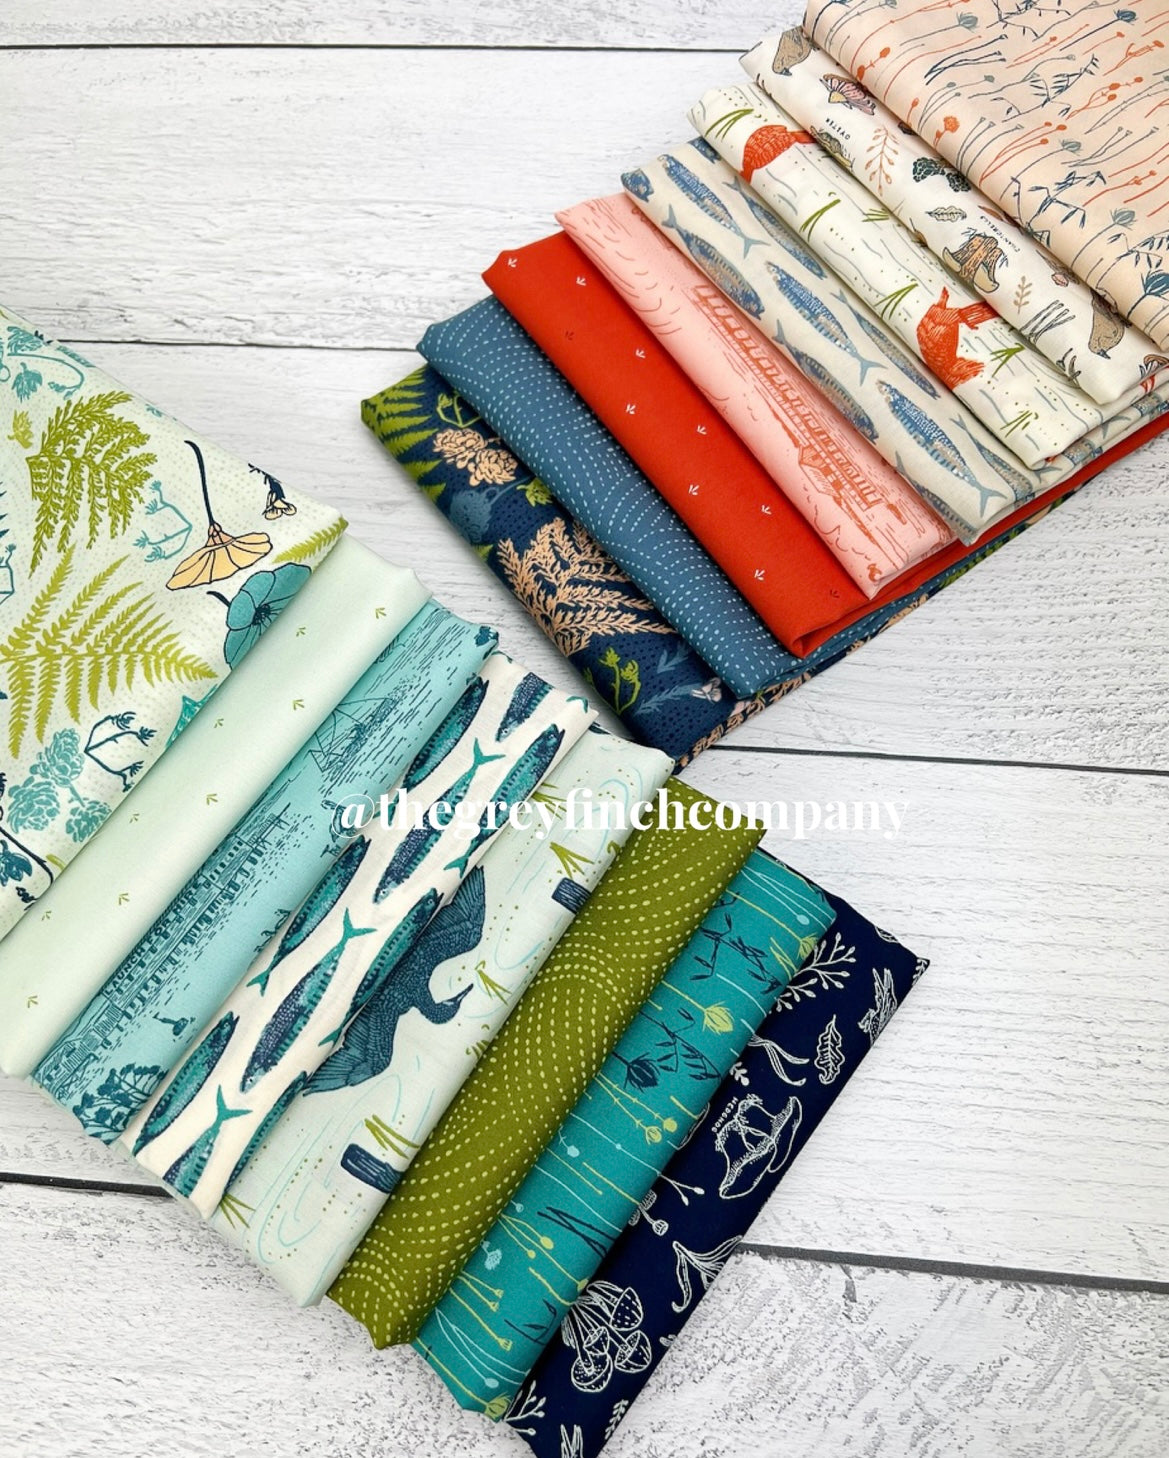 Tomales Bay Collection Bundle - 16 fabrics by Katie O’Shea - Art Gallery Fabrics